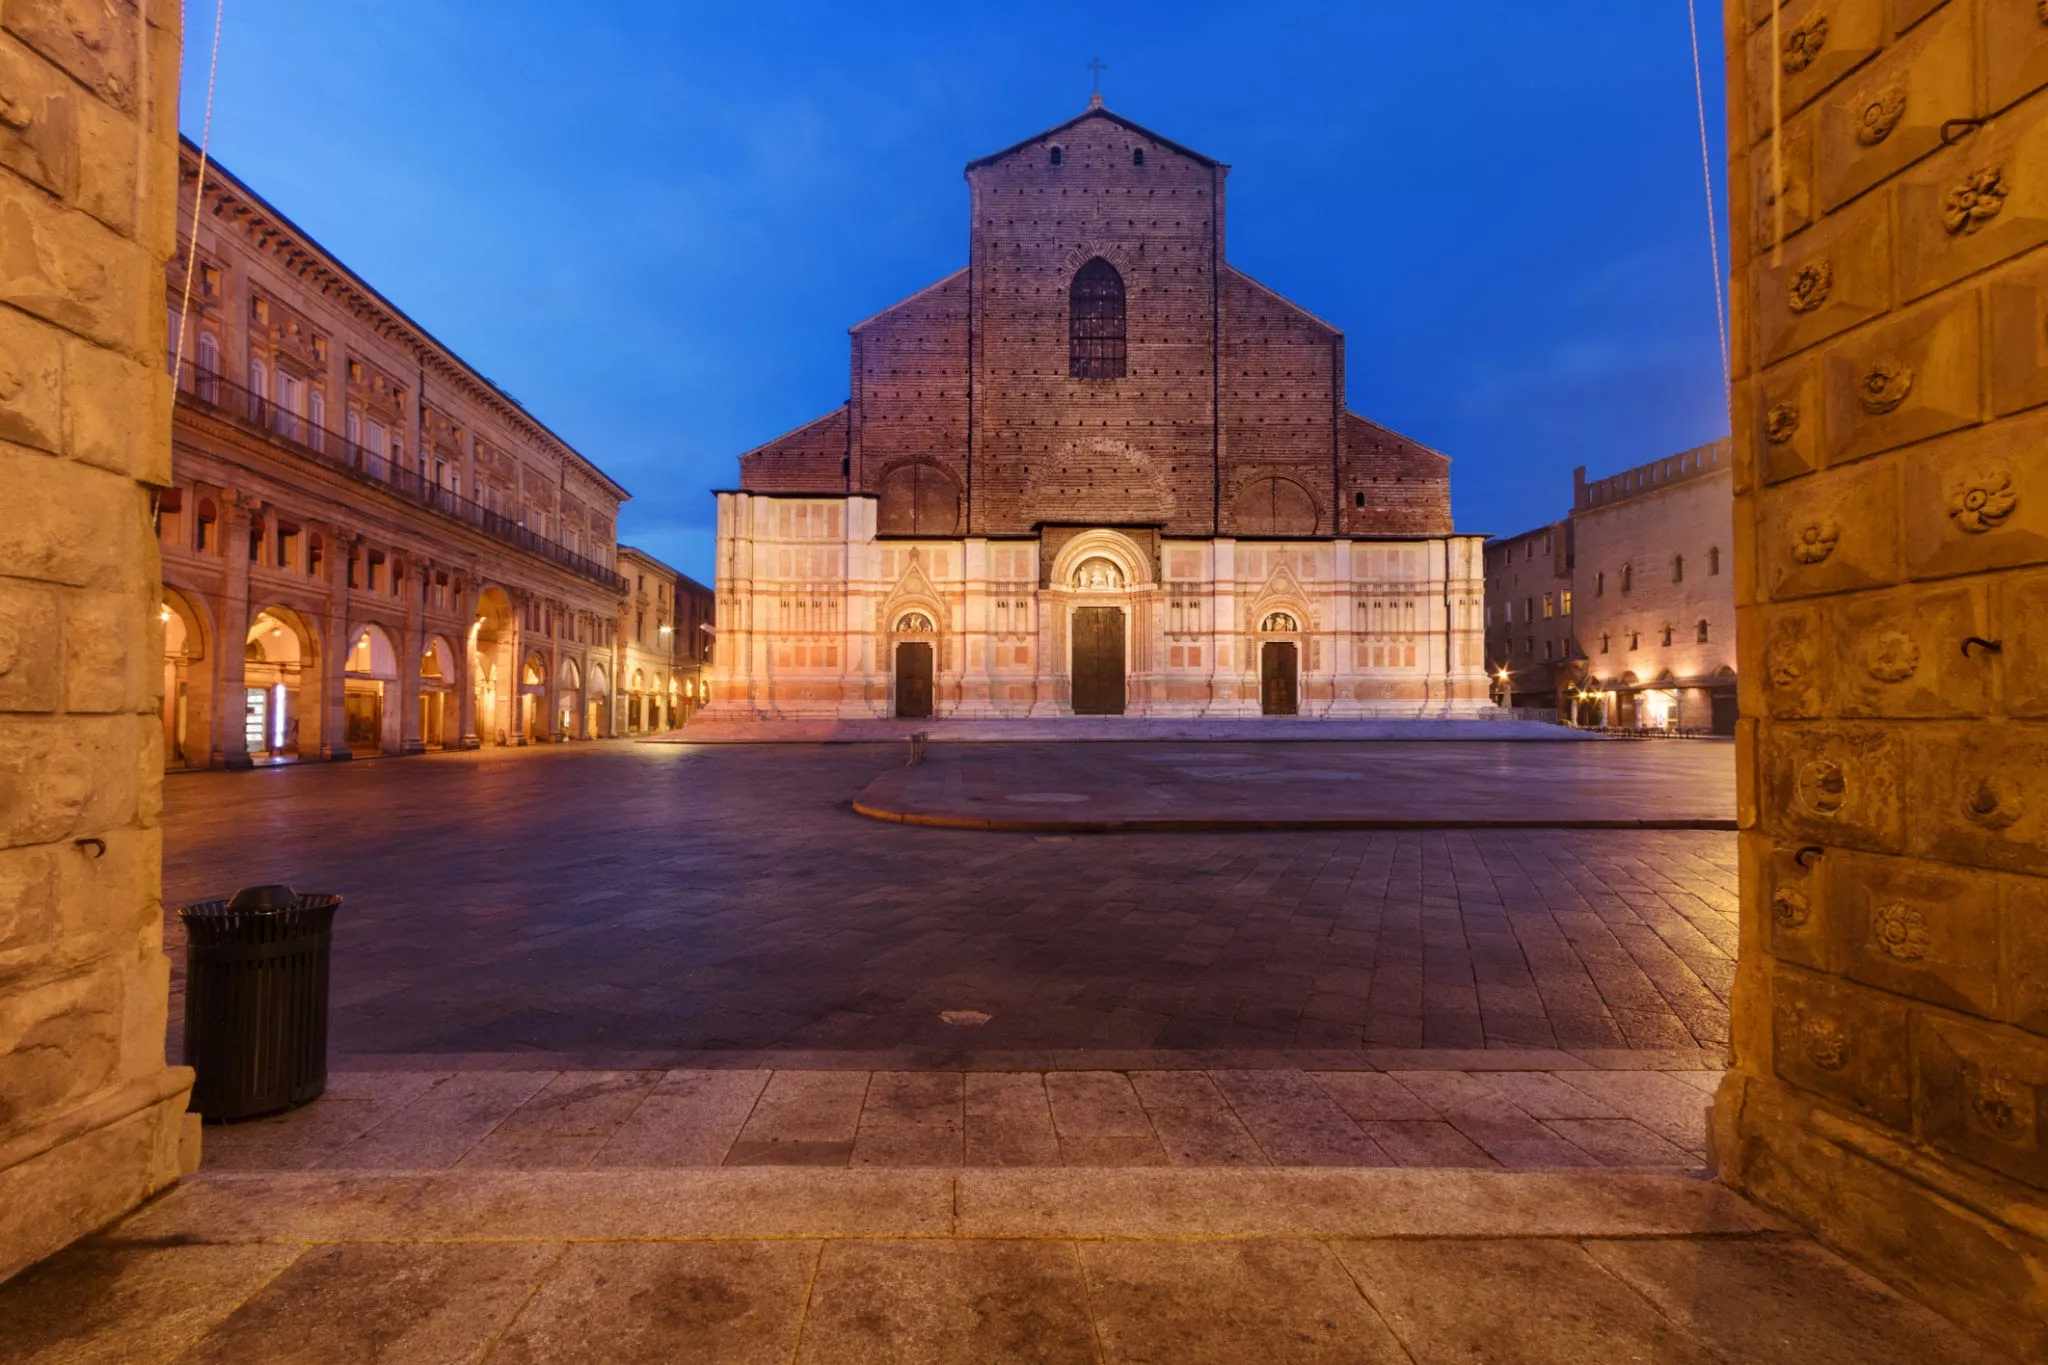 Basilica of San Petronio in Italy, Europe | Architecture - Rated 3.8